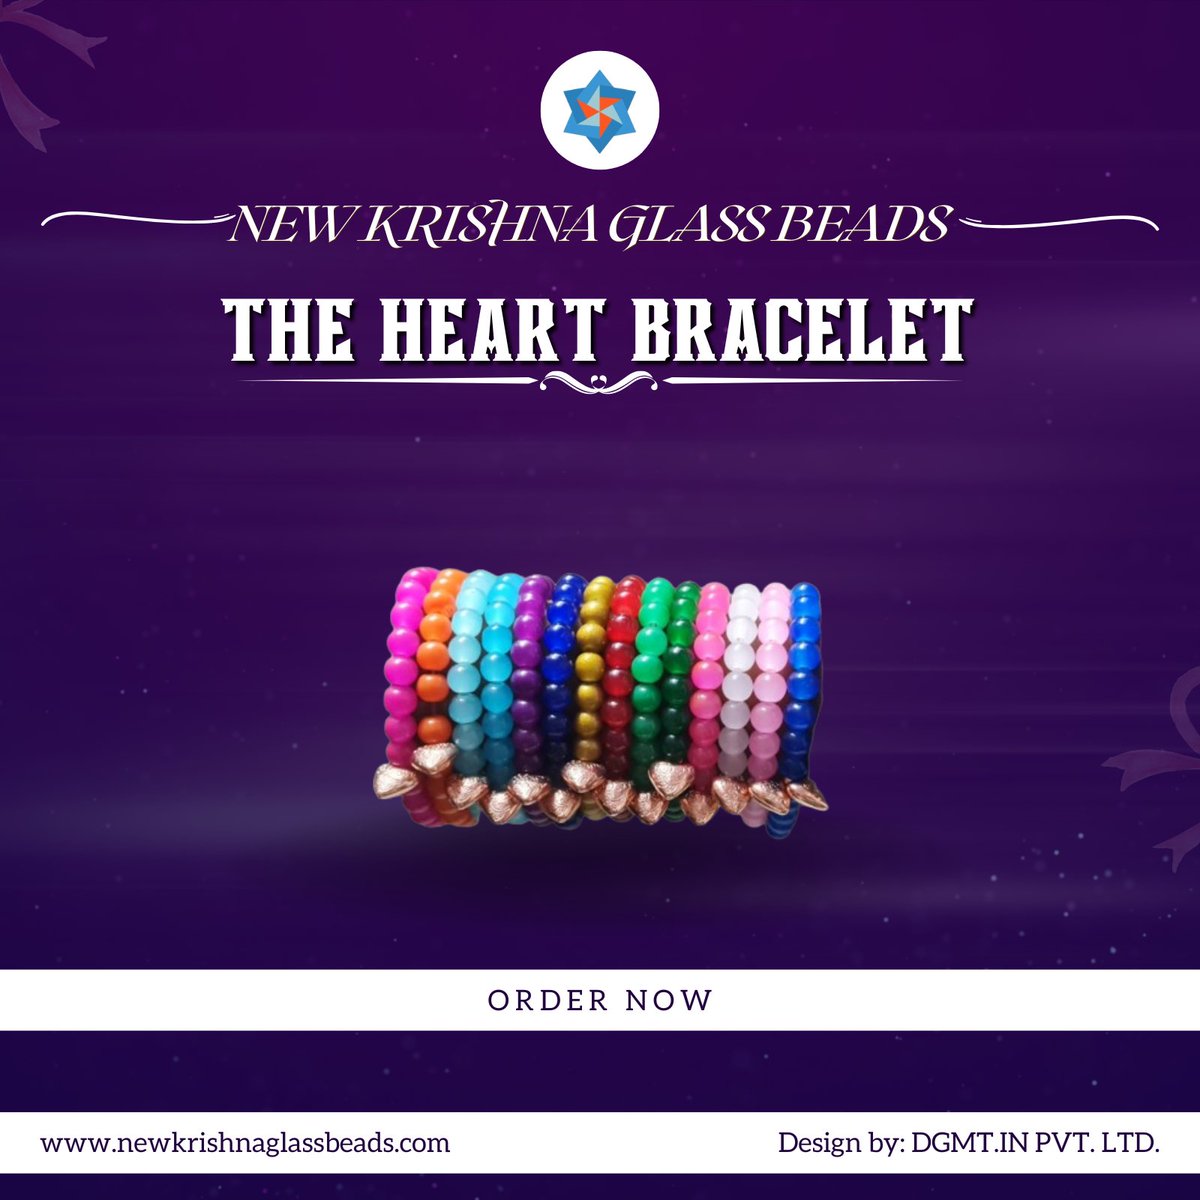 Embrace the essence of love with our Heart Bracelet from New Krishna Glass Beads! 💖 Let each bead weave a tale of warmth and connection, celebrating affection in every detail.

#HeartfeltStyle #NewKrishnaGlassBeads #LoveInEveryBead #heartbracelet #heartshapebeads #heartjewelry